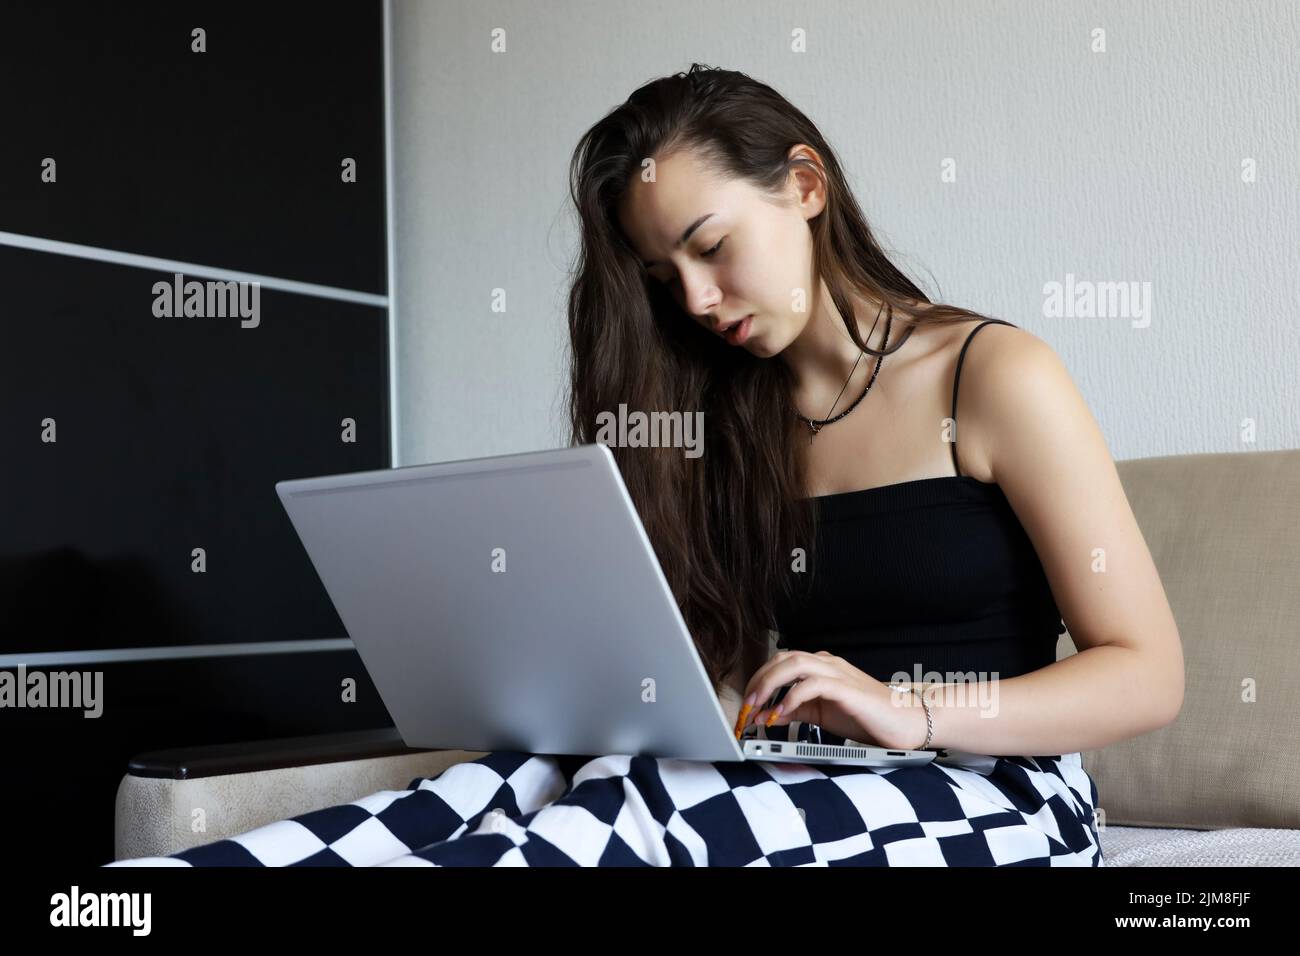 Pretty young girl with long hair wearing black top sitting with laptop on sofa. Concept of work, study or leisure at home Stock Photo